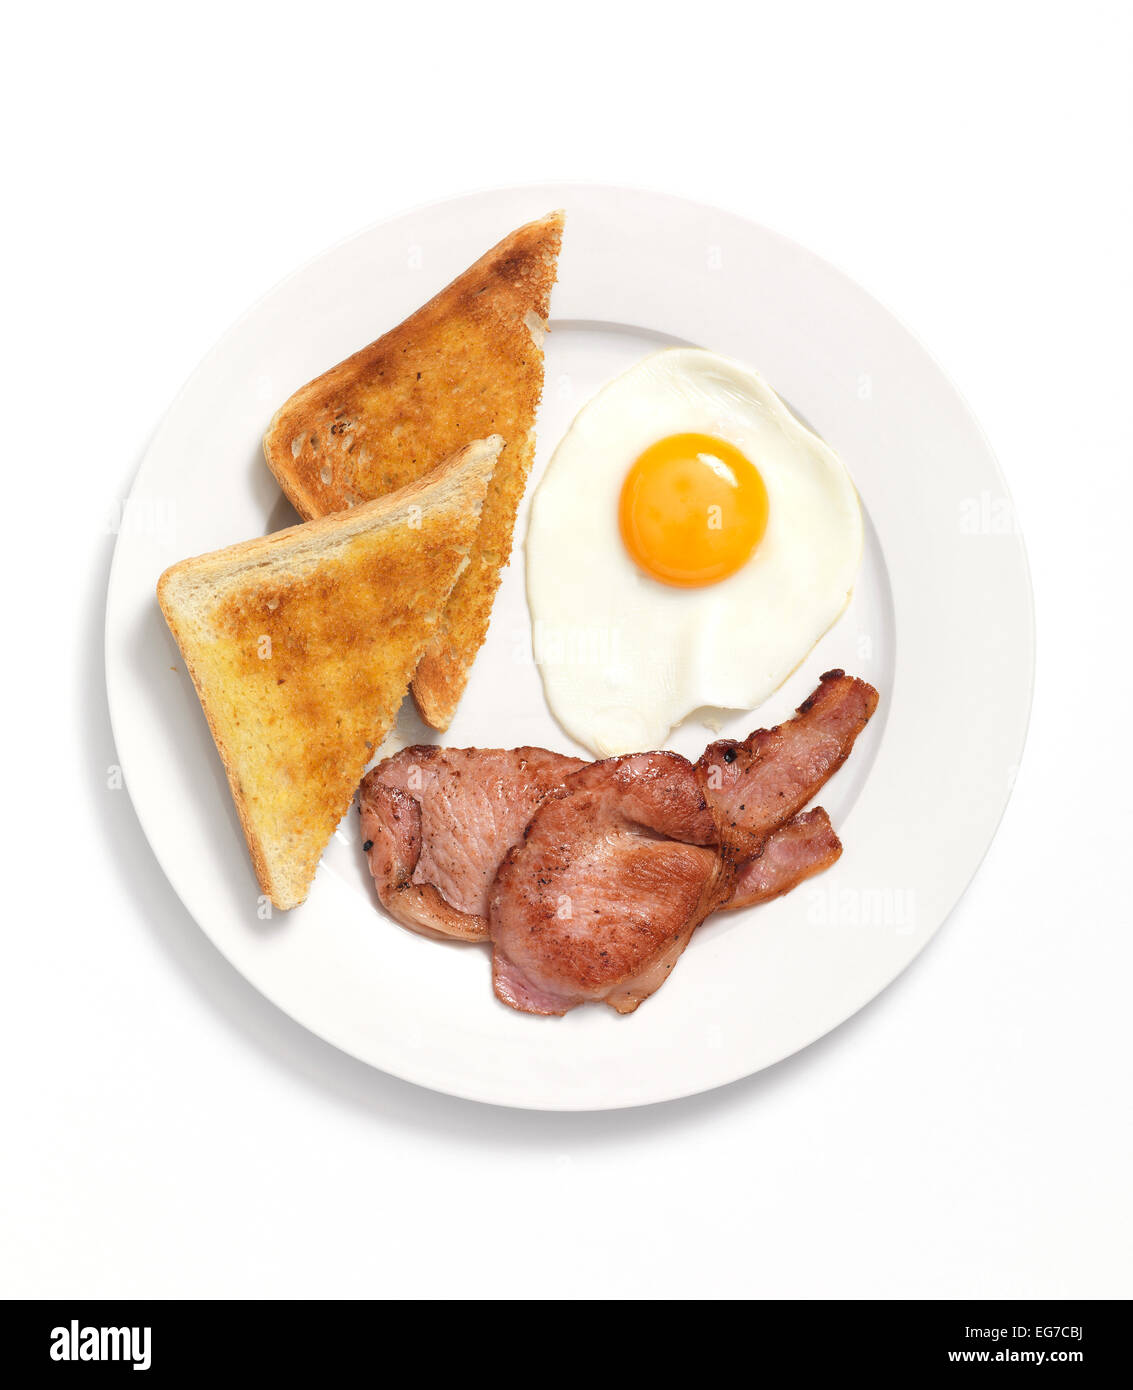 Fried Breakfast on white plate Stock Photo